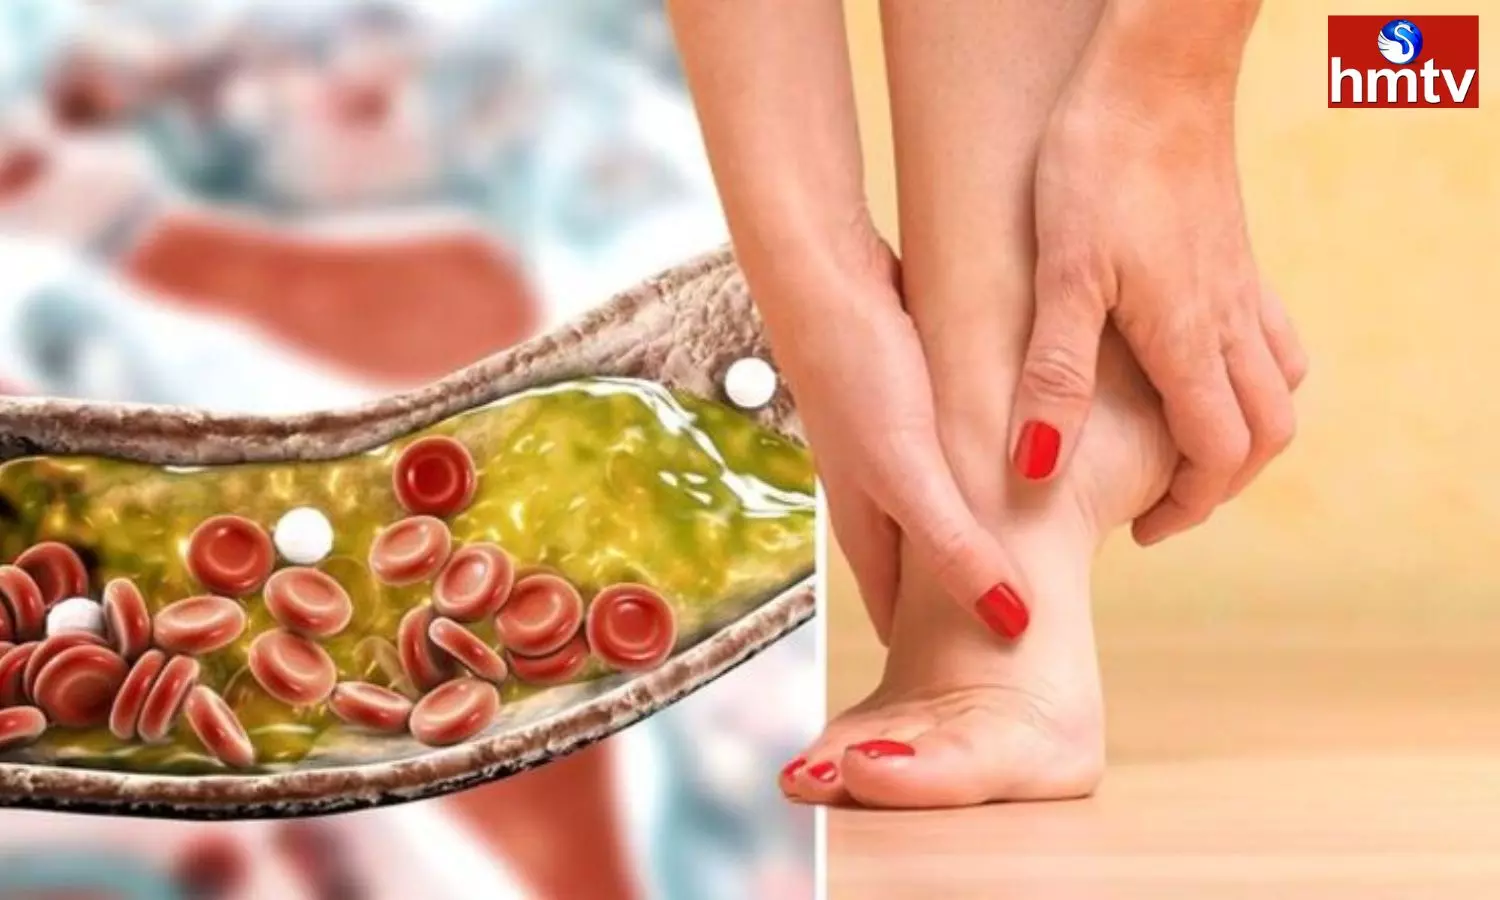 These Problems in the Feet are Bad Cholesterol Symptoms it is Very Dangerous to Ignore